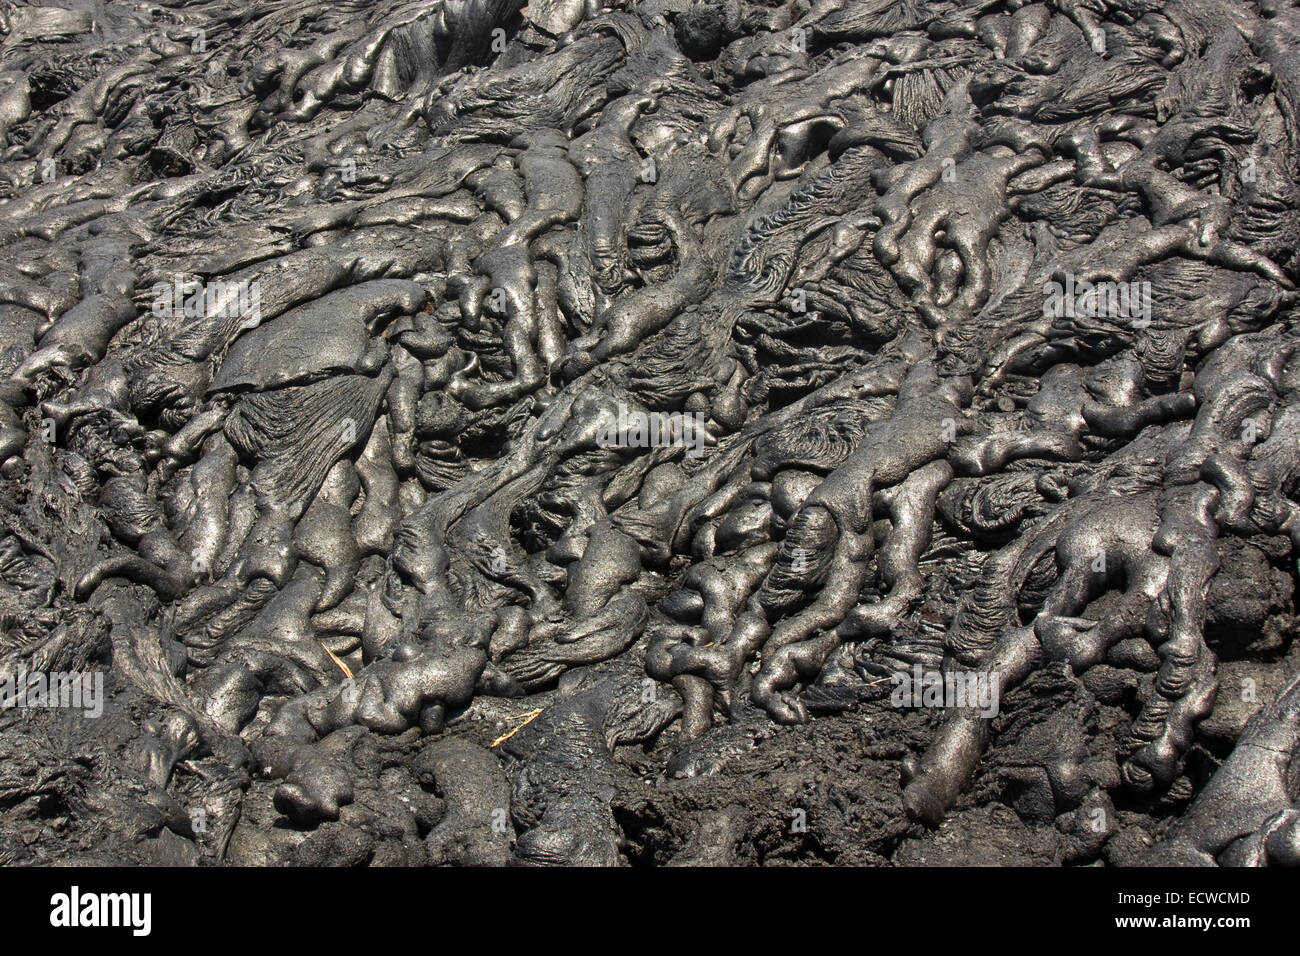 Lava flow (pahoehoe type with smooth unbroken surface) Stock Photo